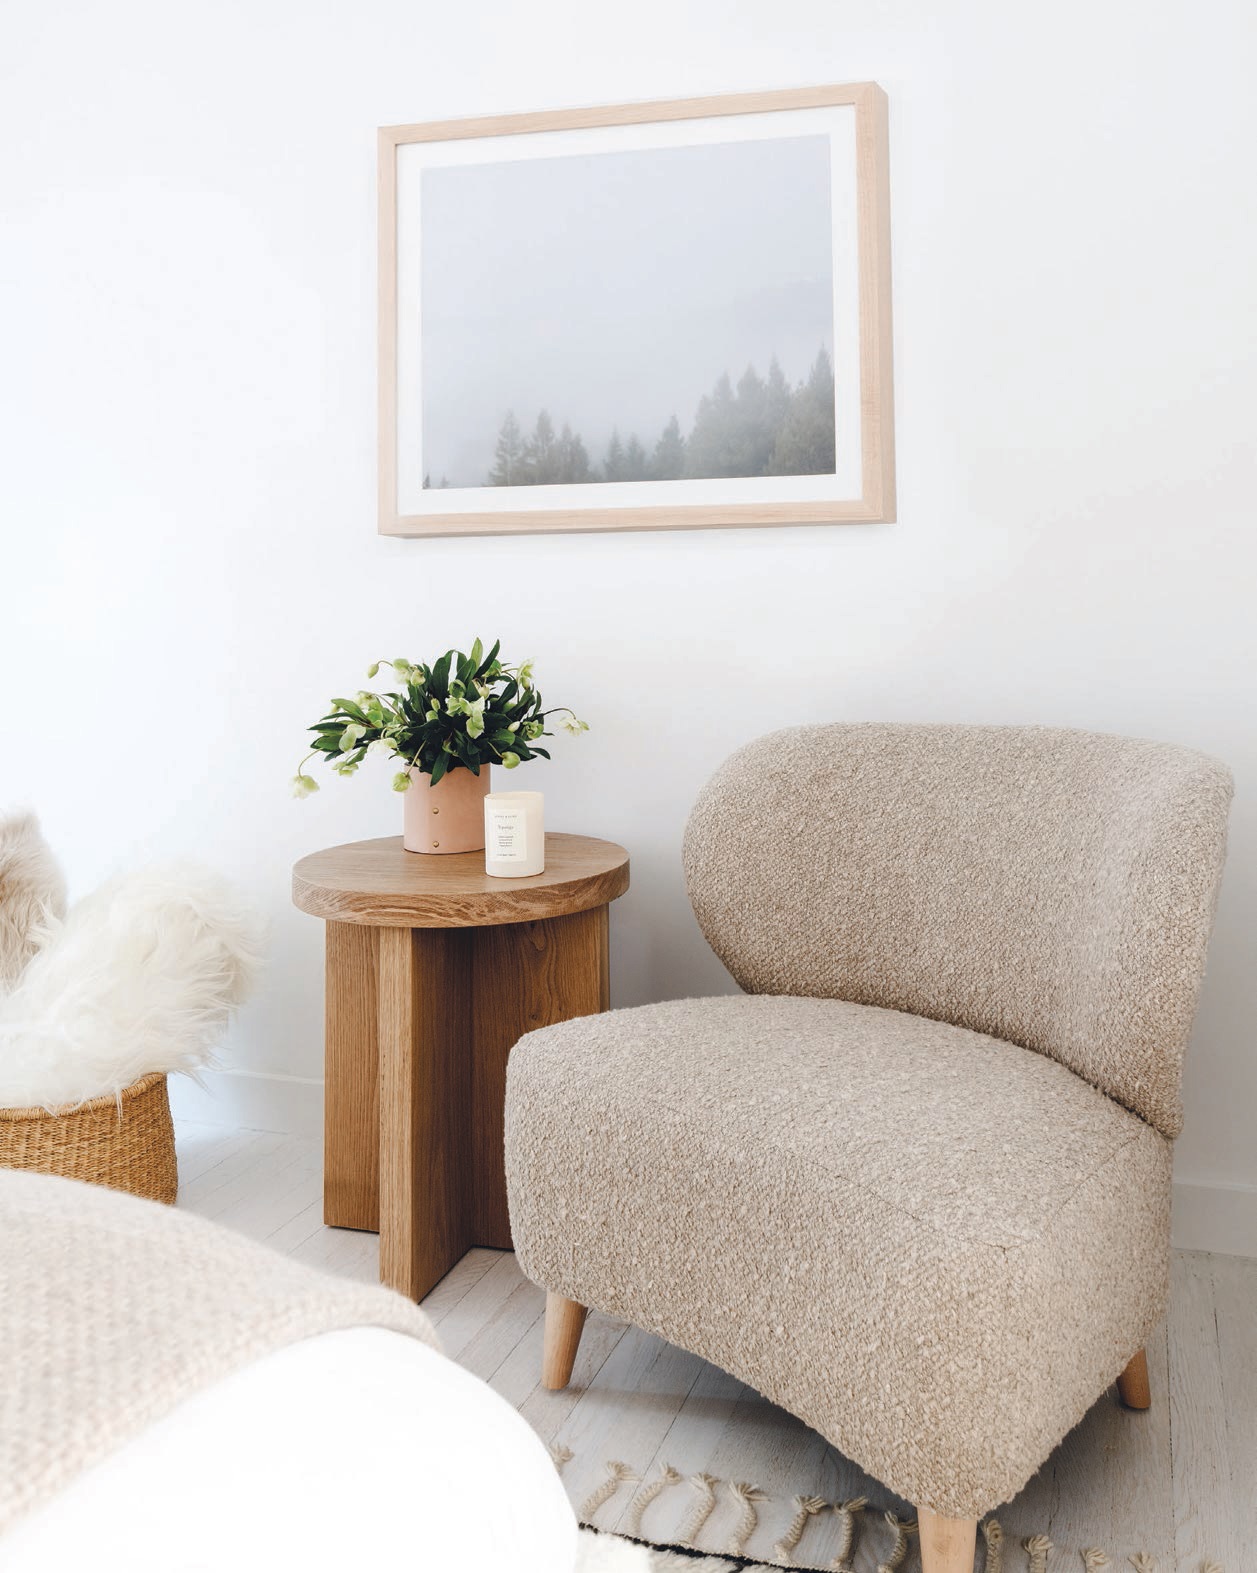 Handmade in the U.S., the Brentwood boucle chair adds a welcome touch of texture to any room while still remaining neutral. MAIN PHOTO COURTESY OF JENNI KAYNE